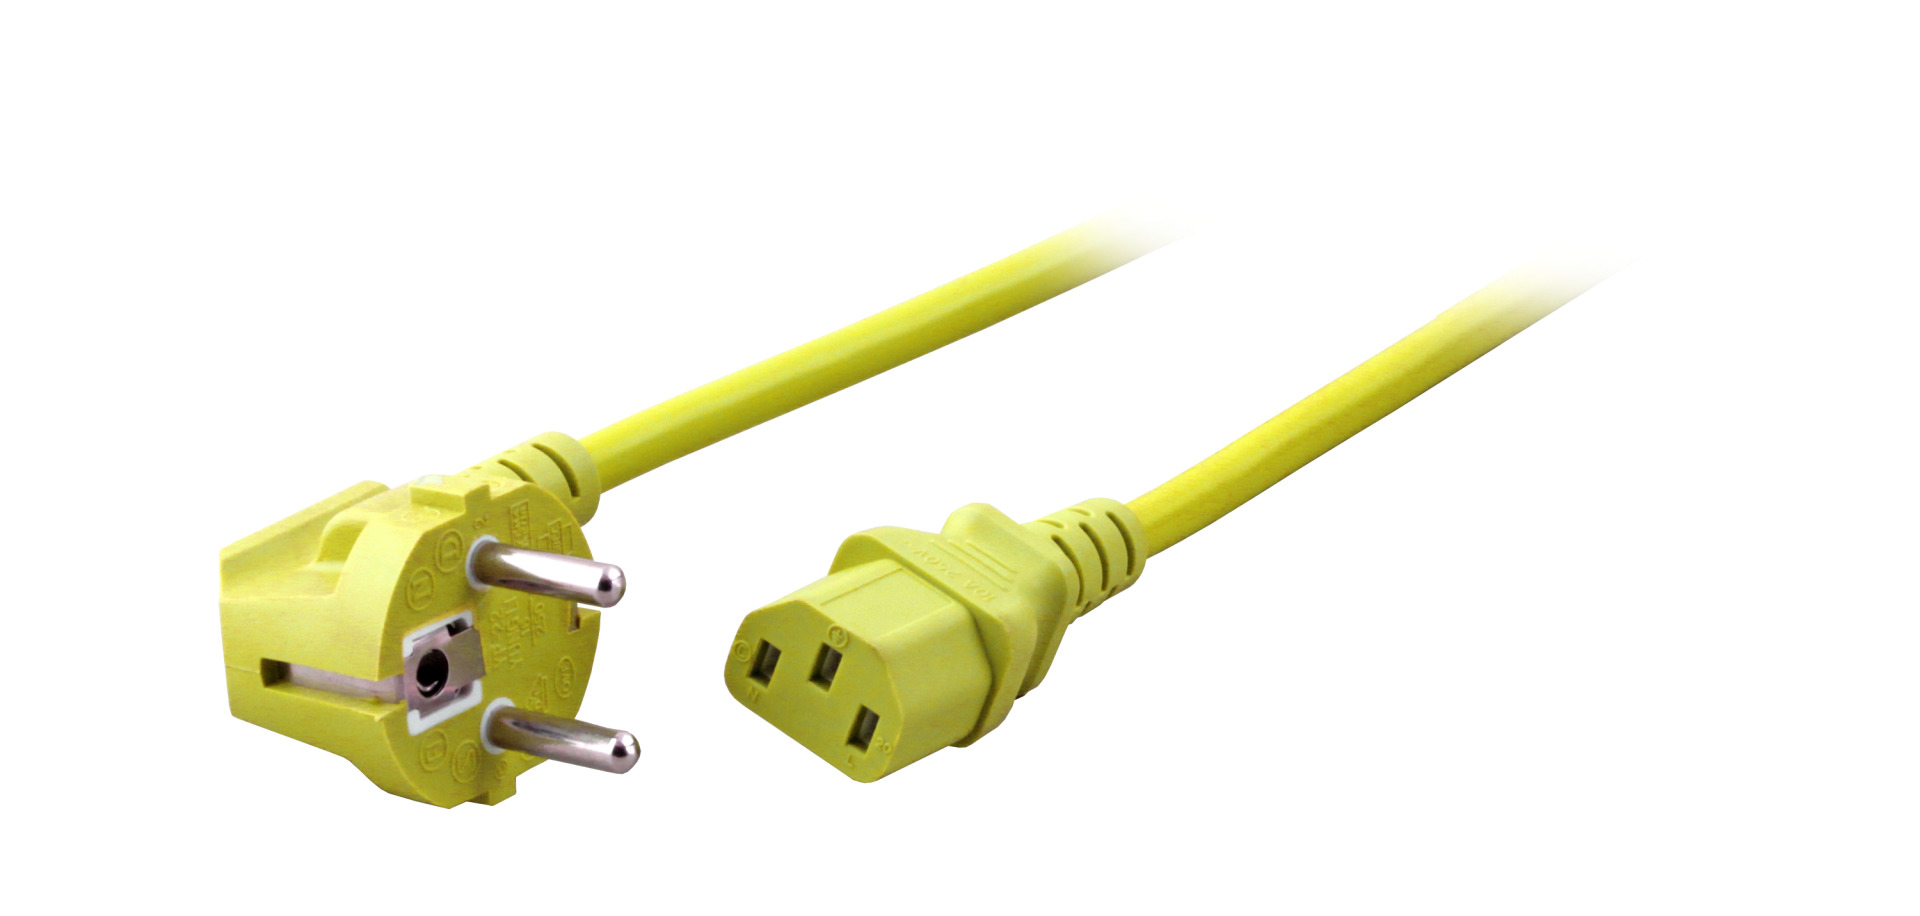 Power Cable CEE7/7 90° - C13 180°, Yellow, 3.0 m, 3 x 1.00 mm²